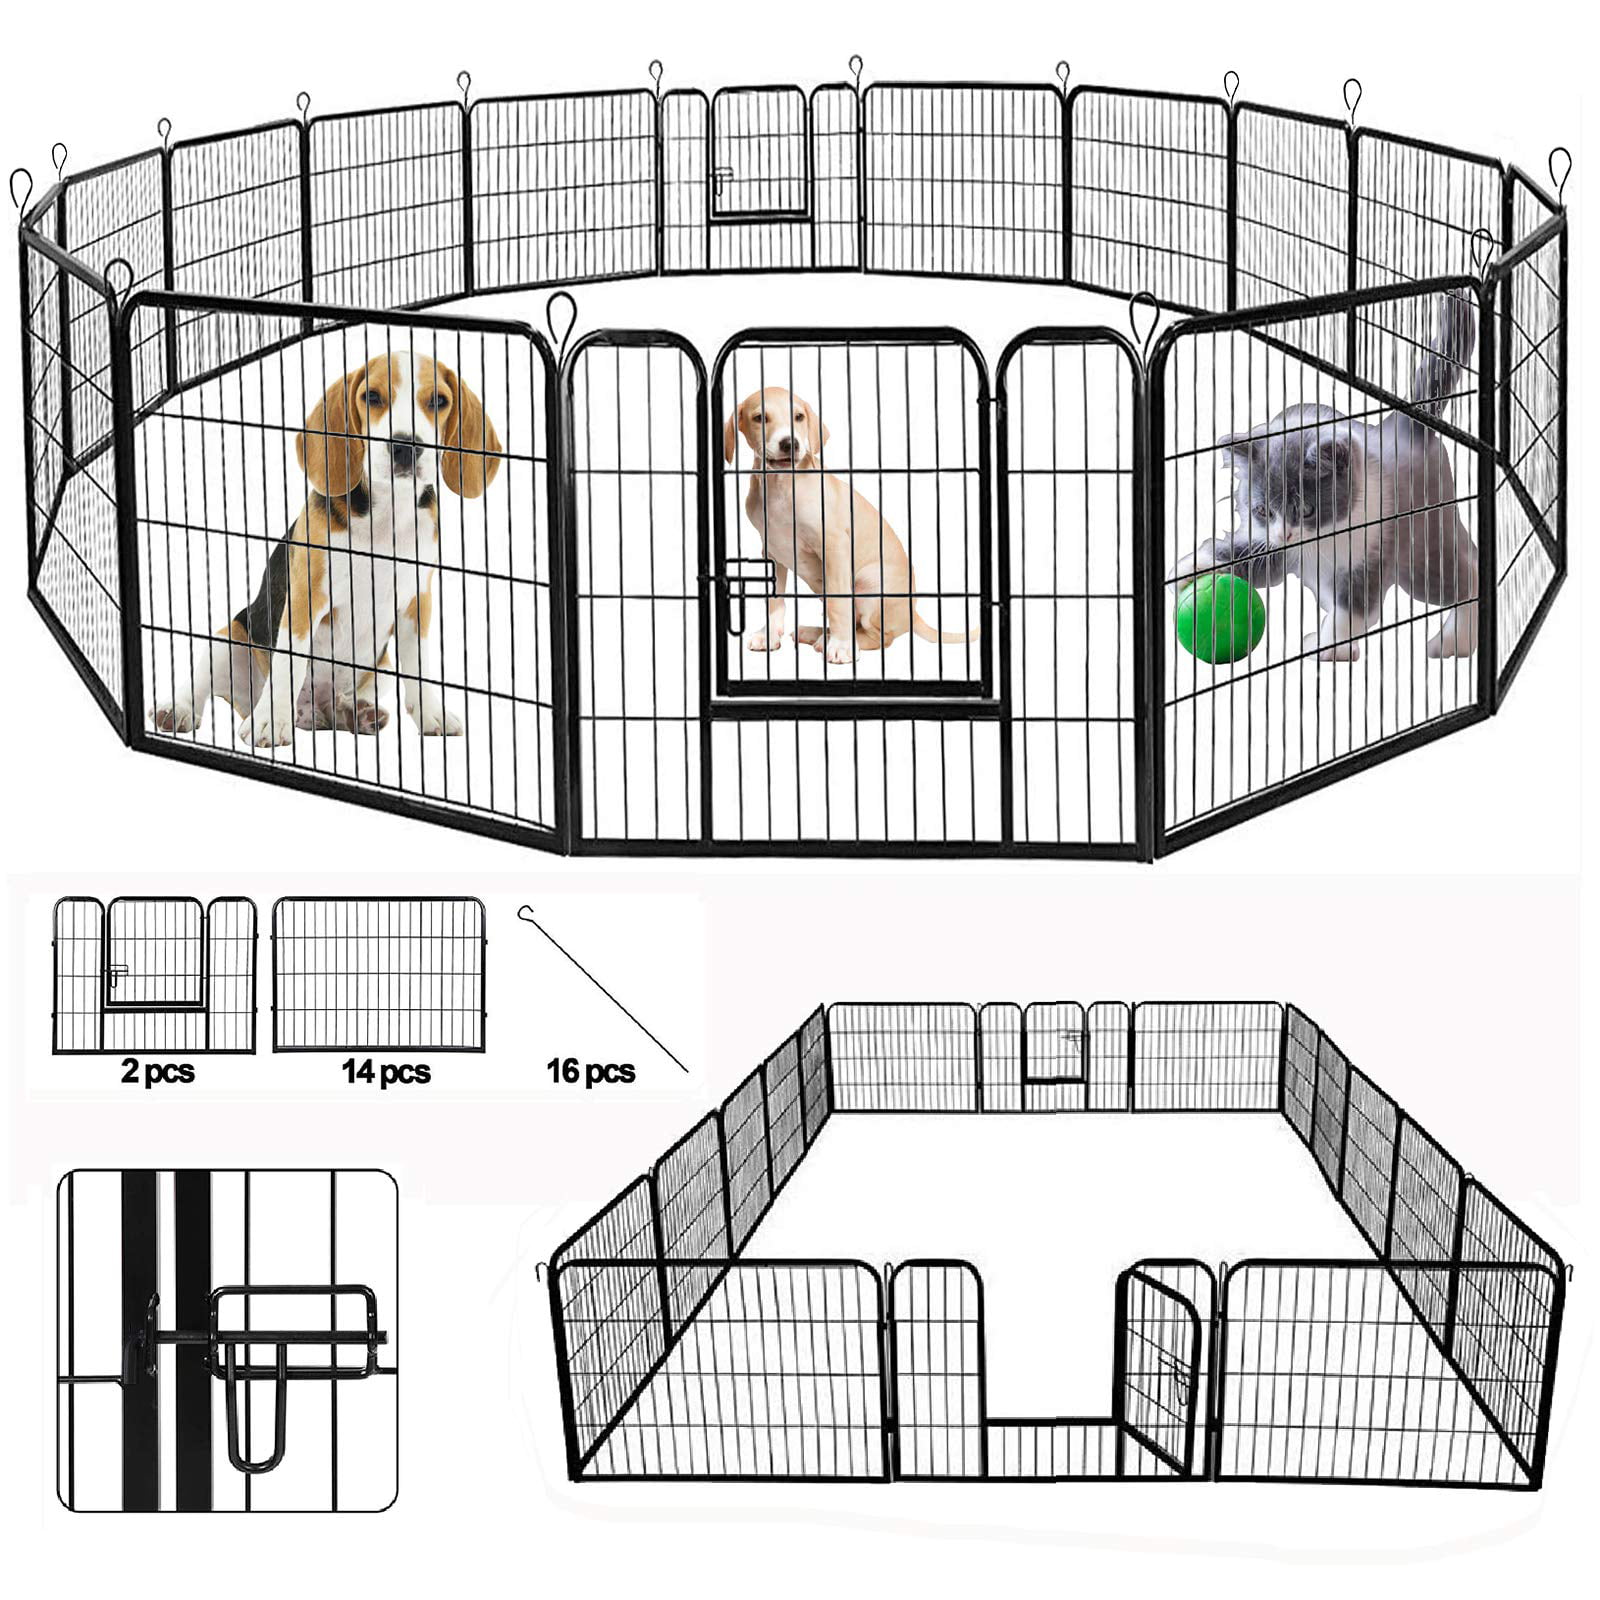 SUNCOO Dog Pen Heavy Duty Folding Large Metal Dog Fence Indoor Outdoor 8/16 Panels 24/32/40 in Anti-Rust Pet Crate Cage Barrier Kennels Cat Puppy Pet Exercise Playpen 